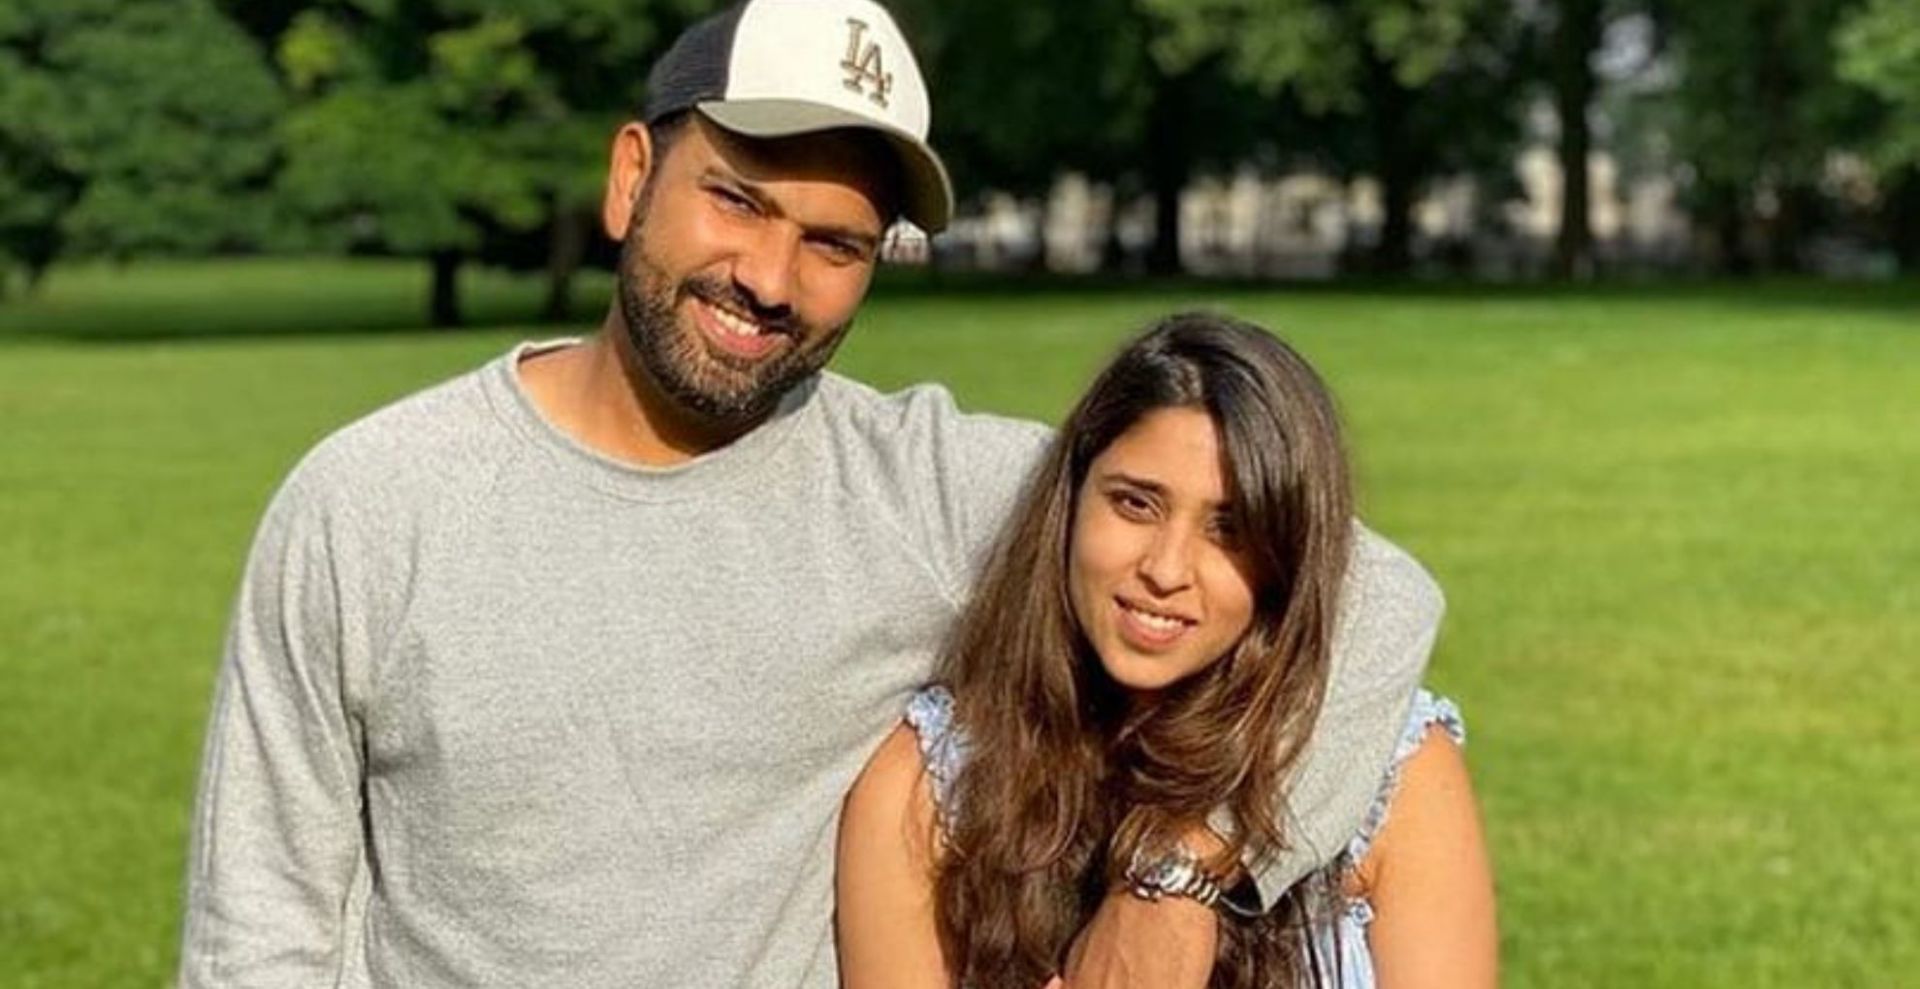 Rohit Sharma spends quality time with his wife Ritika Sajdeh. (Credit: Twitter)